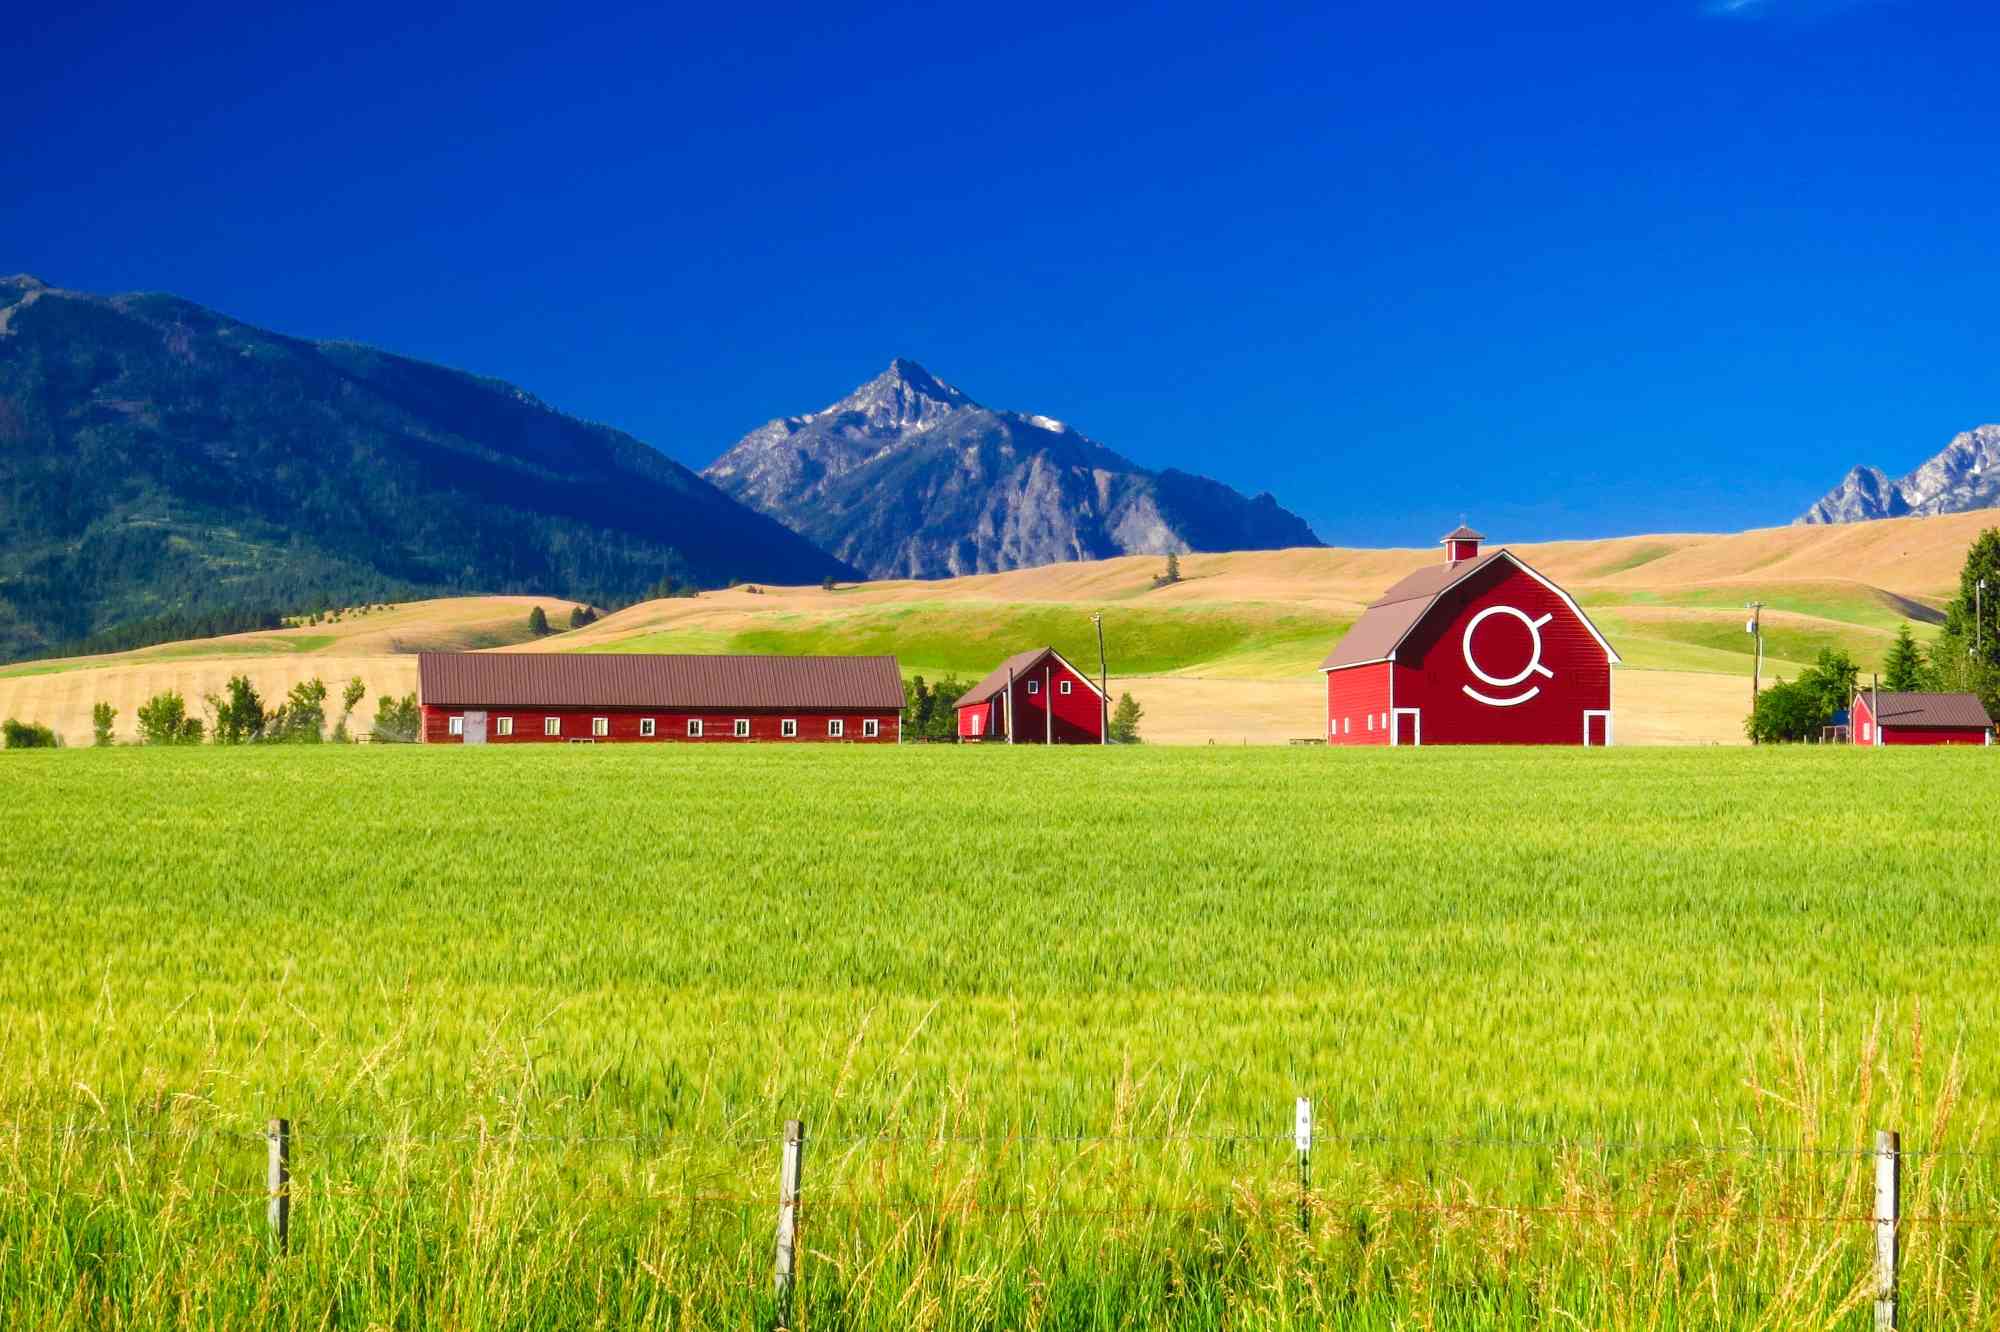 Red Barns and Mountains - Wallowa Whitman National Forest - Oregon